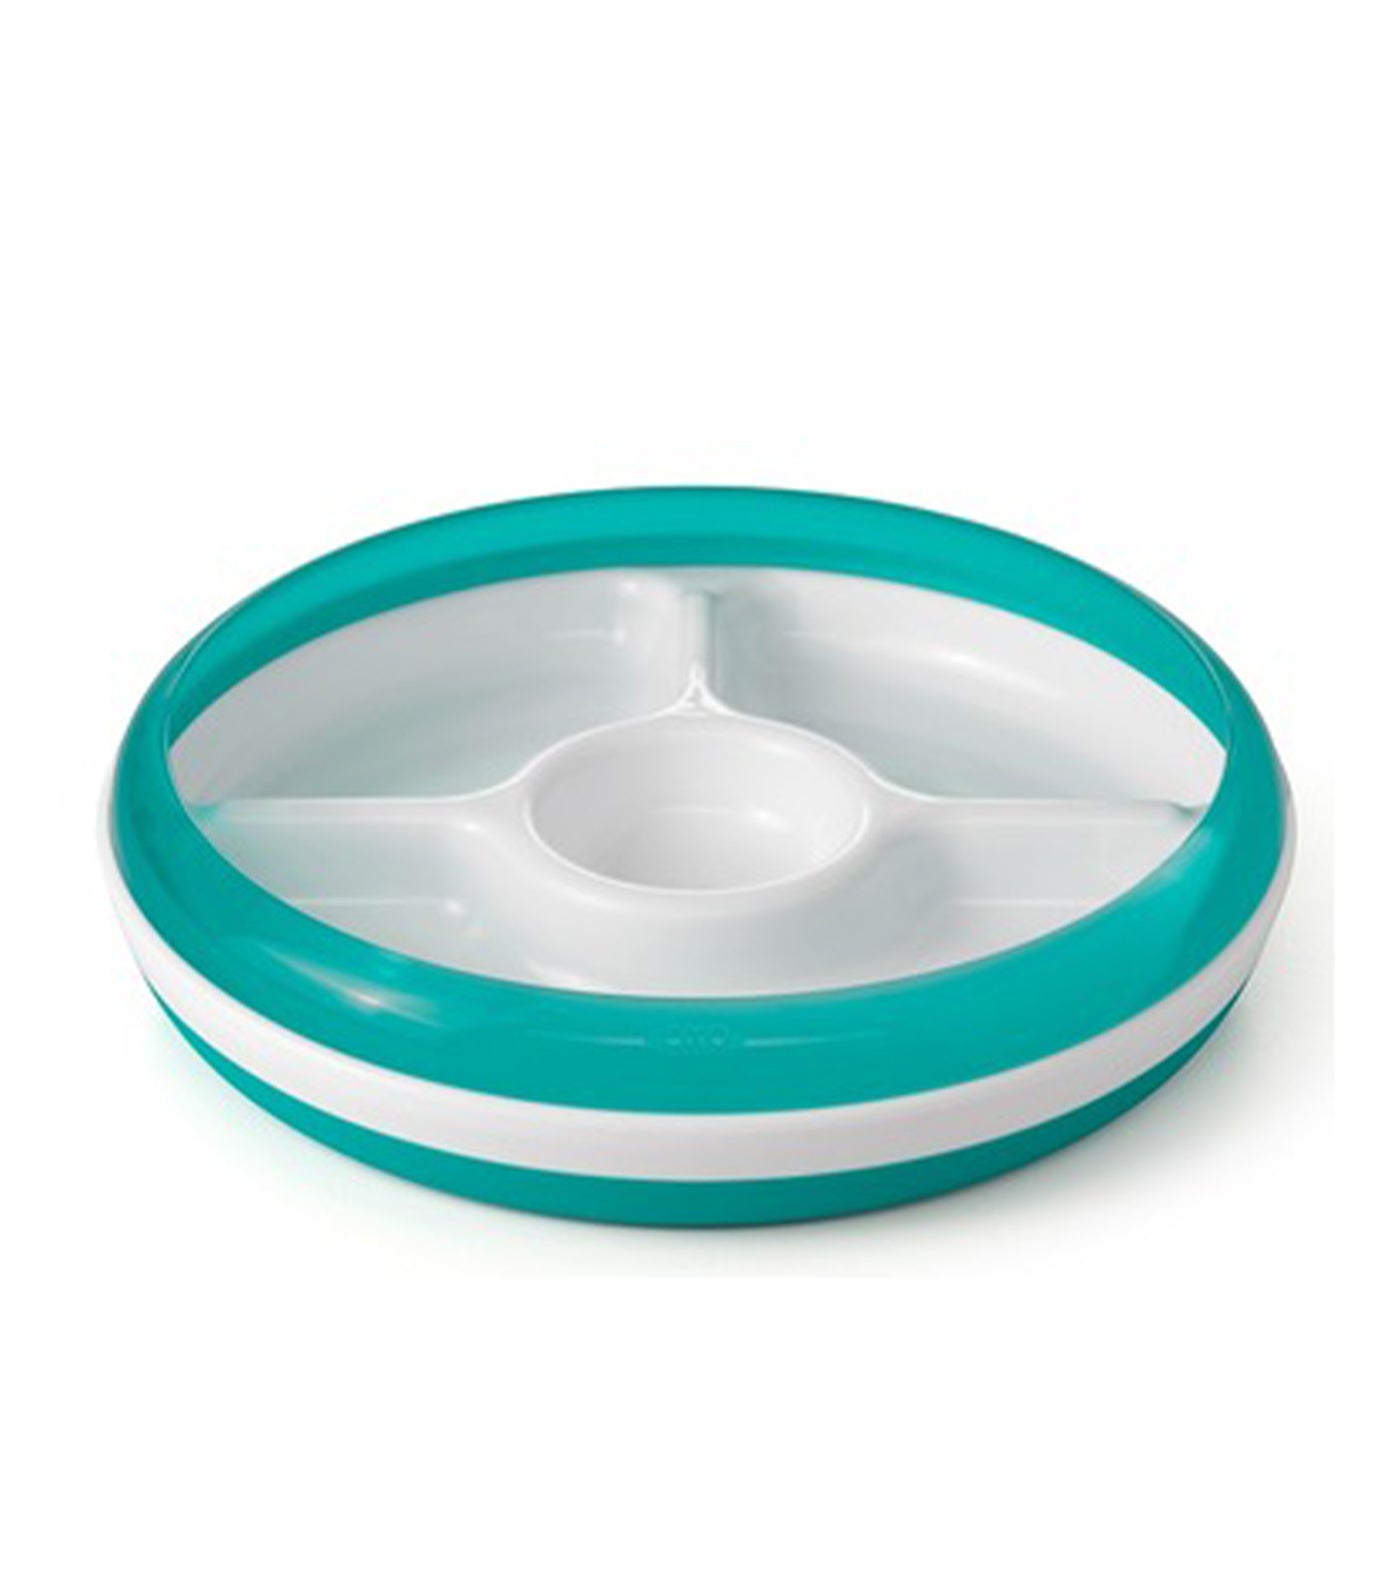 oxo tot teal divided plate with removable training ring